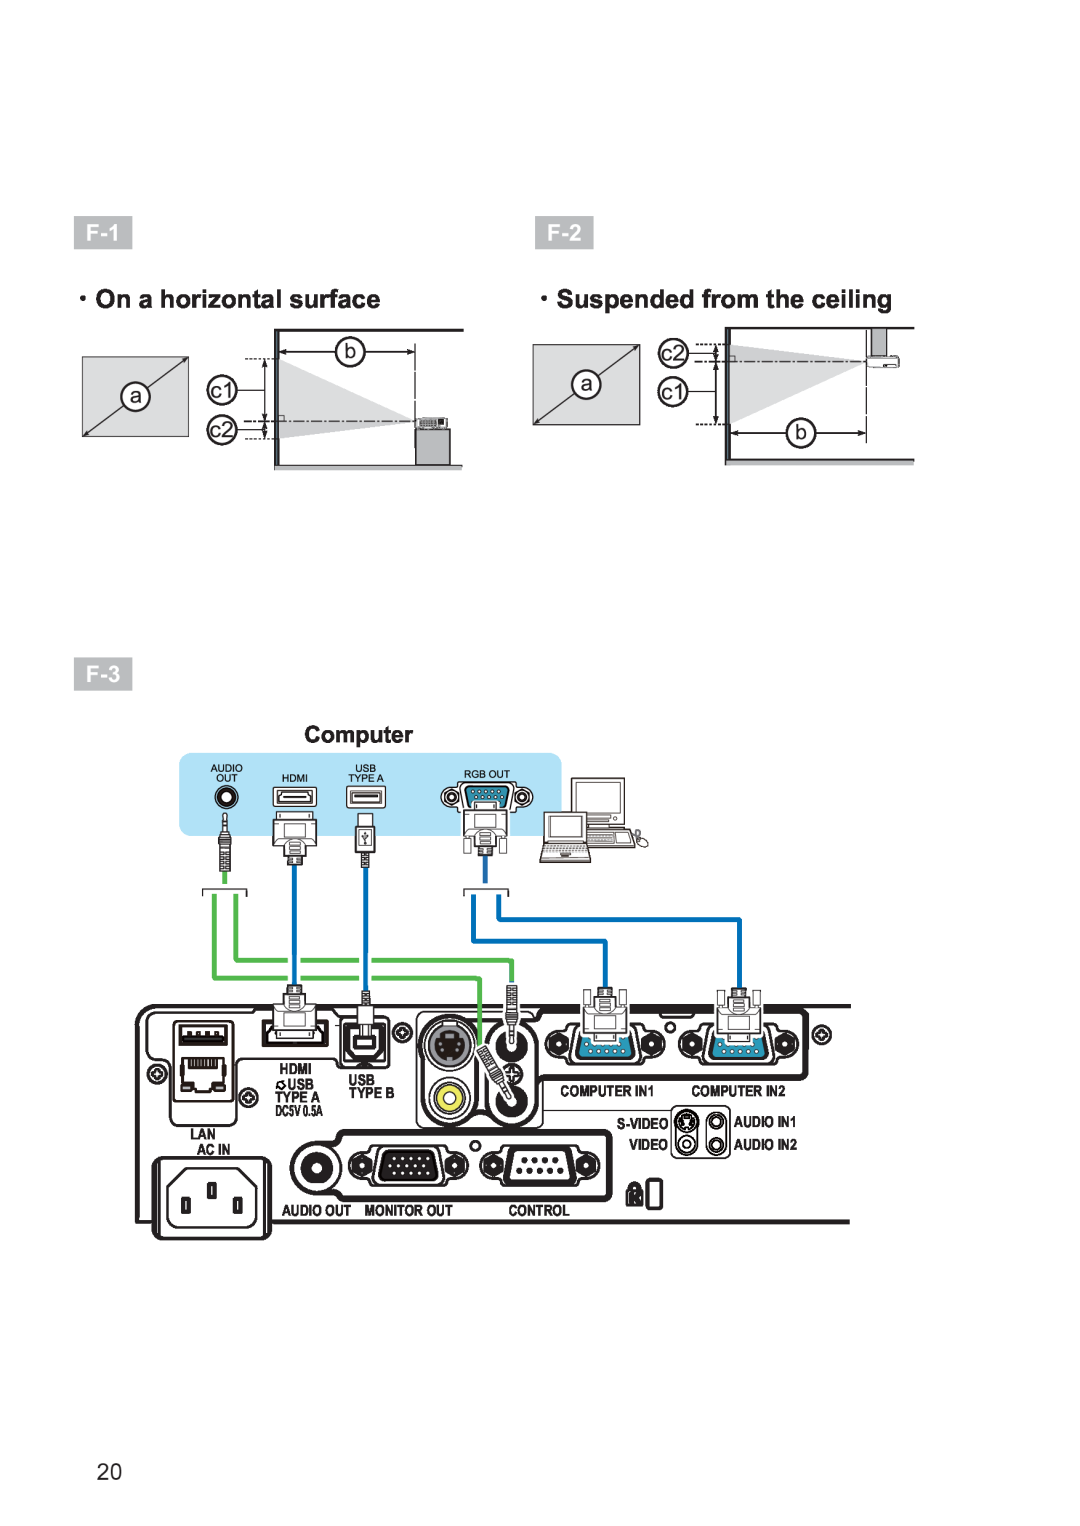 Hitachi CP-X2521WN ・On a horizontal surface, ・Suspended from the ceiling, HDMI USB USB TYPE A TYPE B DC5V 0.5A LAN AC IN 